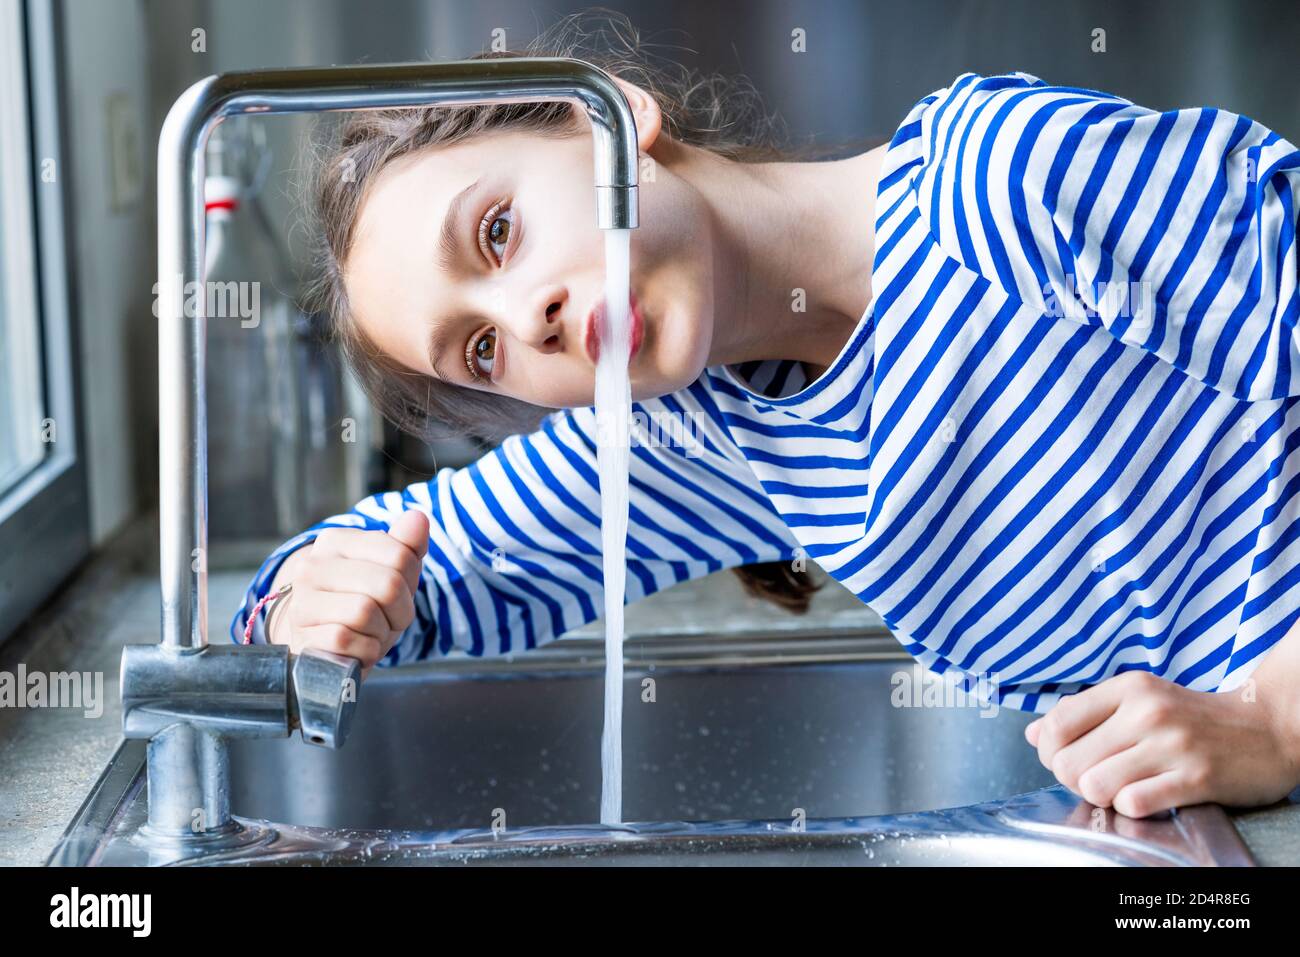 12-year-old girl drinking tap water. Stock Photo